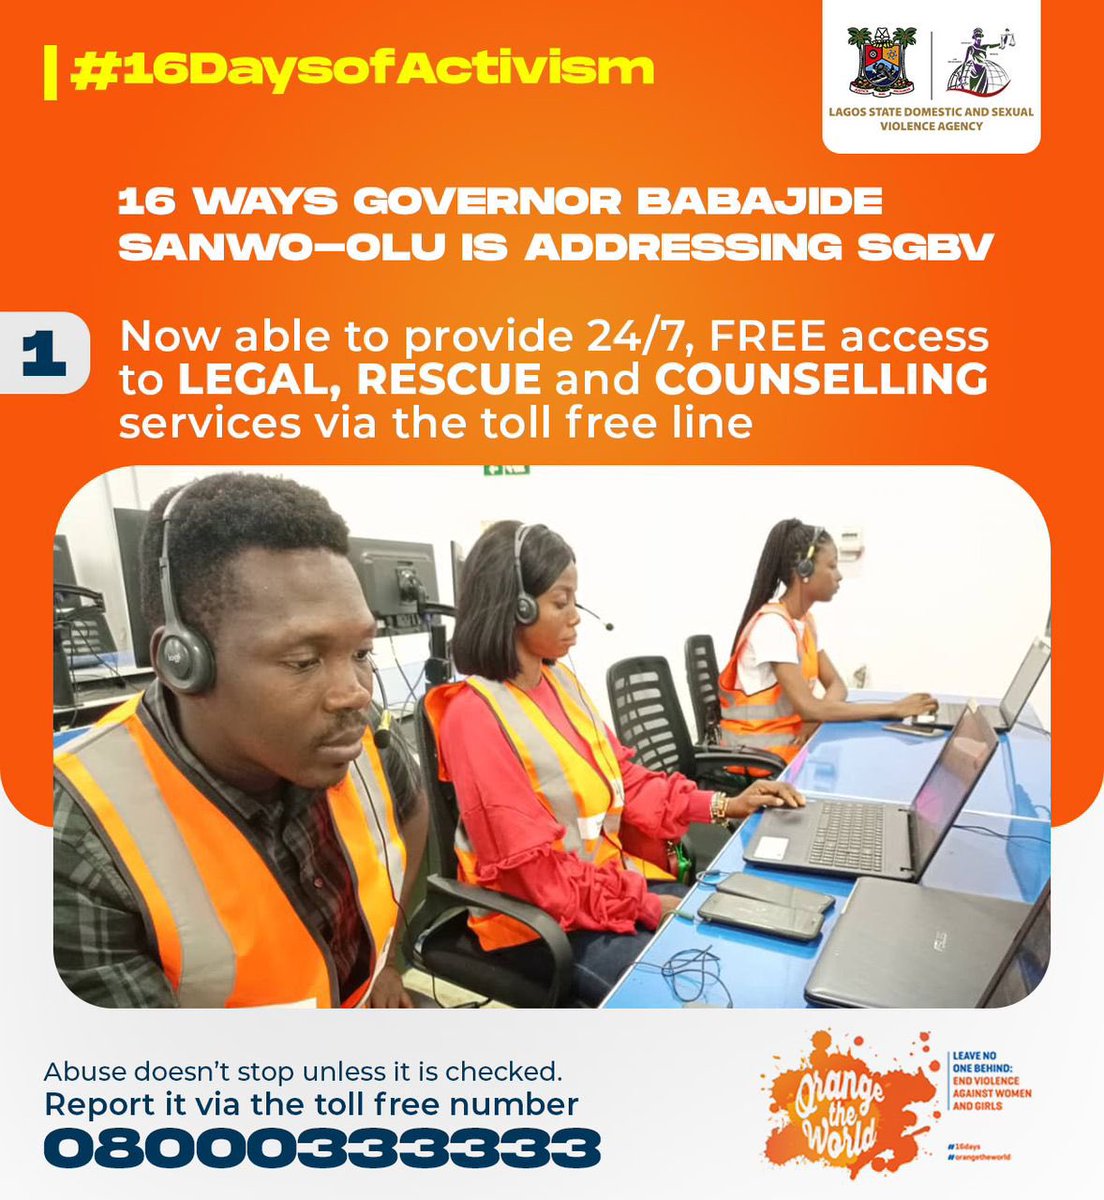 16 ways Babajide Sanwo-Olu is Walking the Talk in eradicating Sexual & Gender Based Violence

1. We now provide 24/7 access to free counseling, rescue and legal support through the tolll free line- 08000 333 333

#16daysofactivism
#OrangeTheWorld 
#SafetyInANumber  
#LagosDSVA